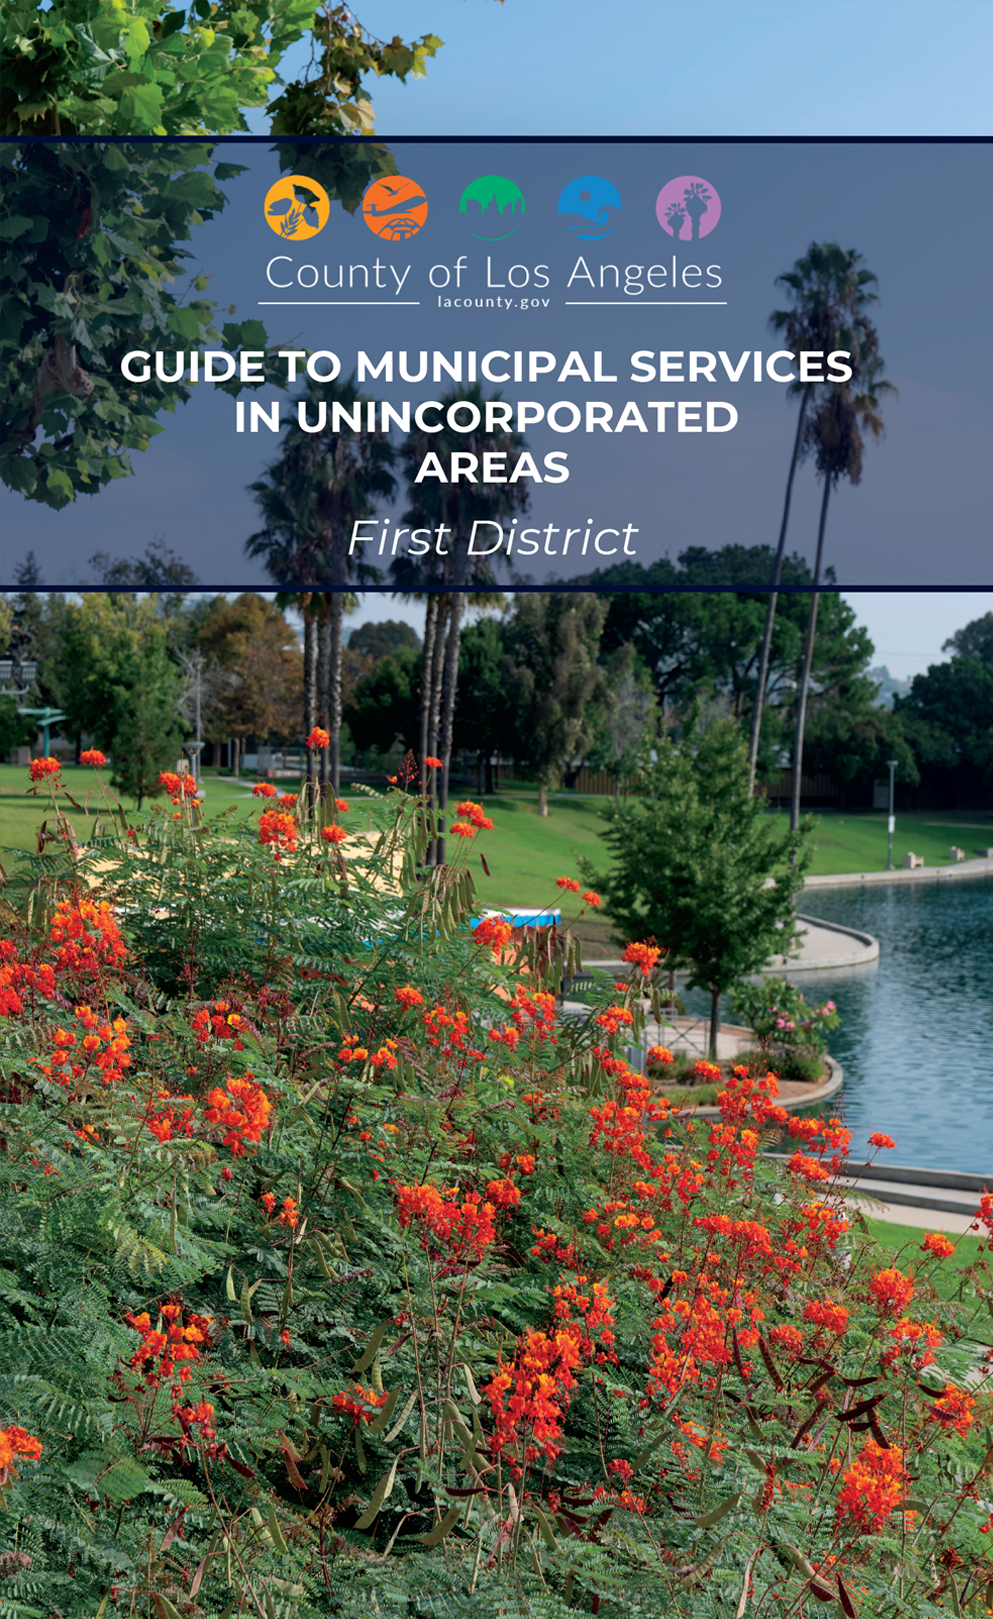 Cover art for the unincorporated services guide for the first supervisorial district.